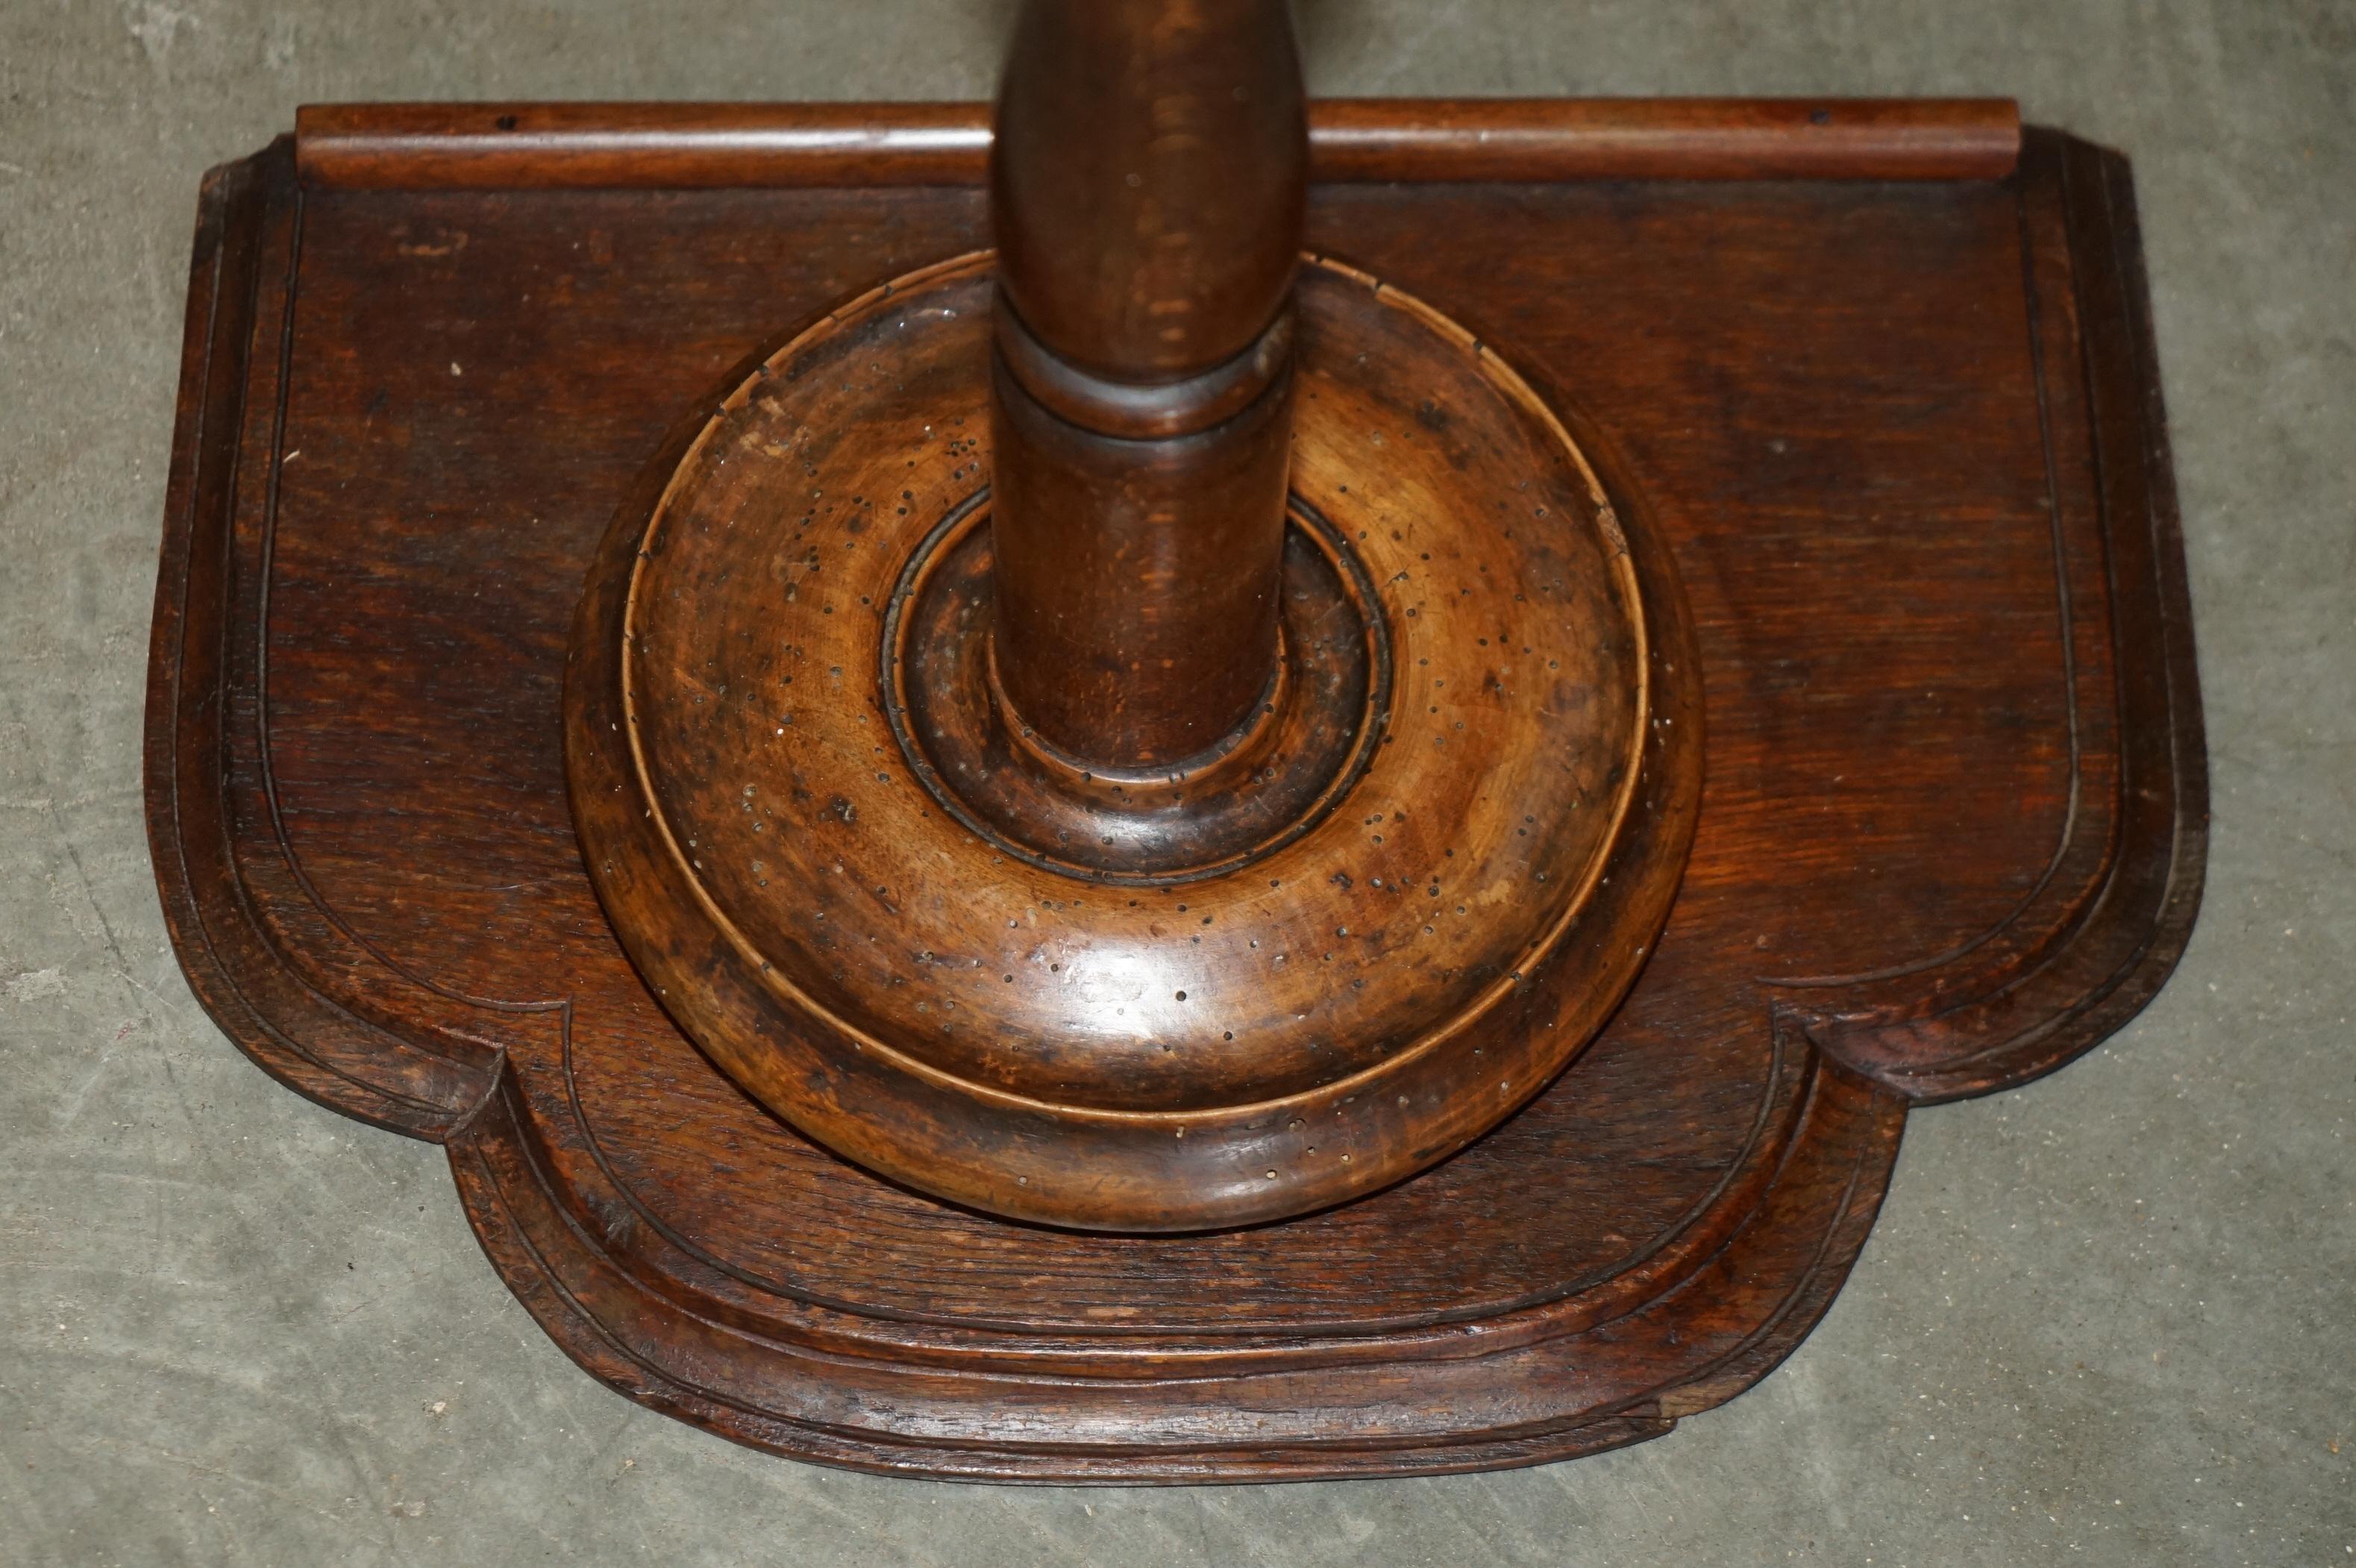 ANTIQUE ViCTORIAN SMOKERS SIDE TABLE DEPICTING CASTLES FOR PIPES TOBACCO CIGARS For Sale 4